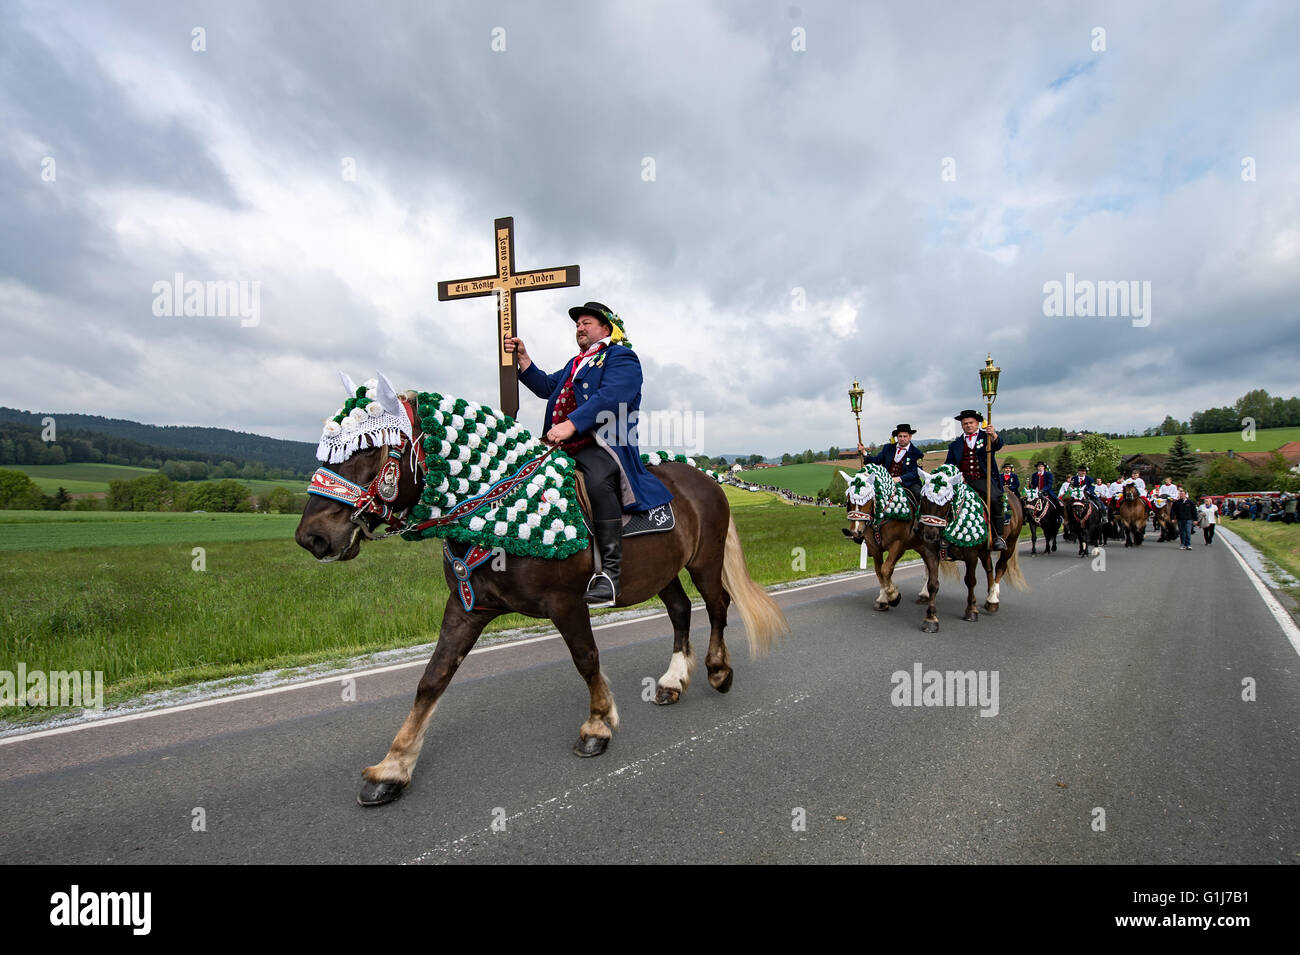 Bad Koetzing, Germany. 16th May, 2016. Participants in the Koetzing Pentecost Ride ride their horses near Bad Koetzing, Germany, 16 May 2016. The procession of 900 horsemen is one of the oldest traditional events in Bavaria. The 'Maennerleut' make an around seven-kilometer pilgrimage on the back of richly adorned horses from Bad Koetzting to St. Nicholas' Church in Steinbuehl. Photo: ARMIN WEIGEL/dpa/Alamy Live News Stock Photo